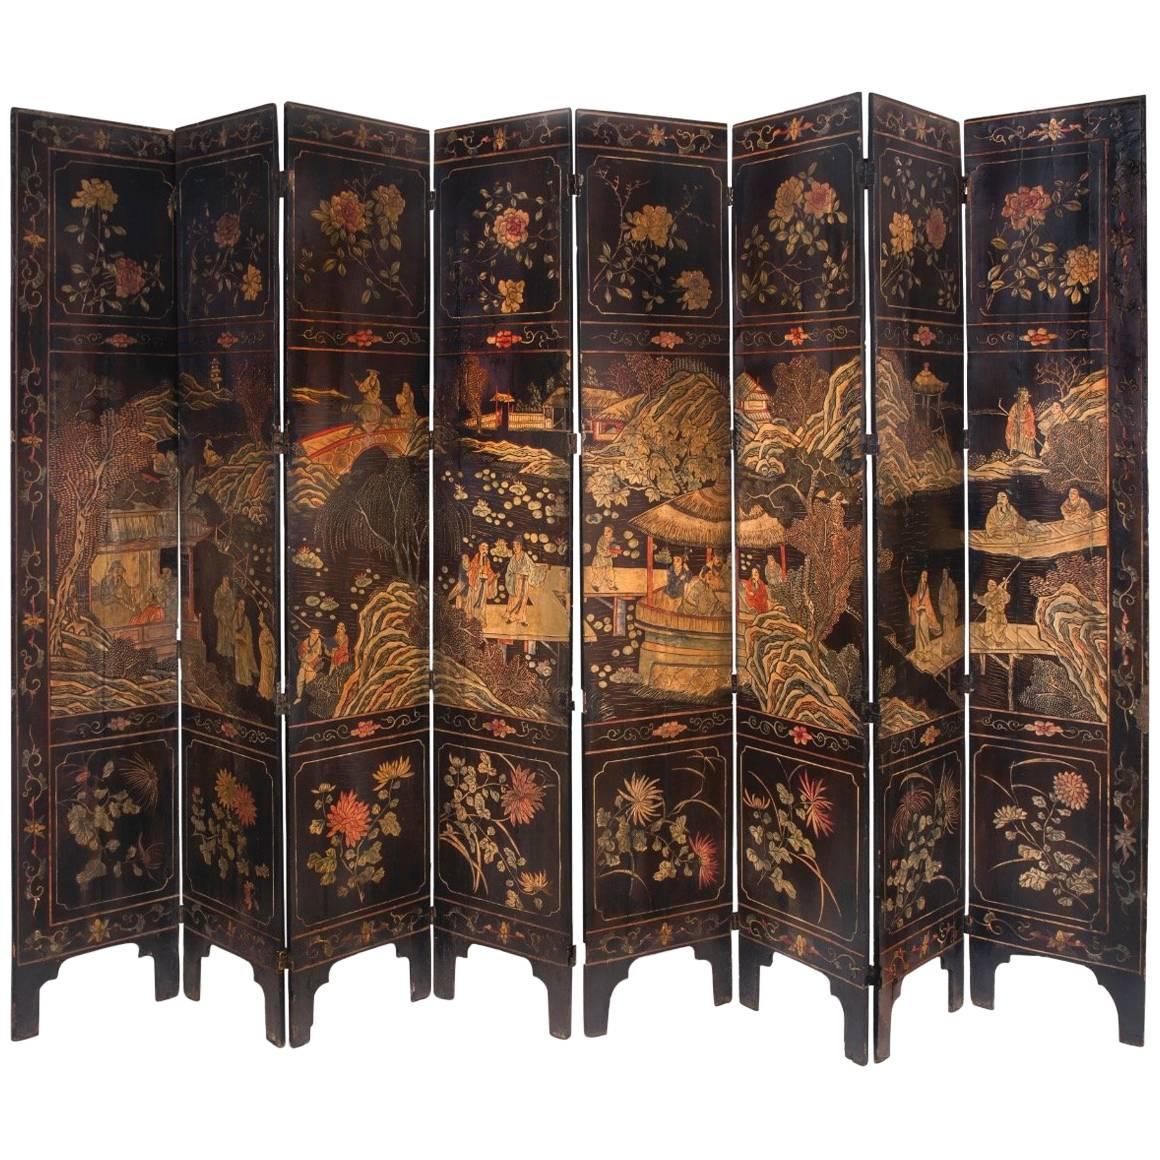 Chinese Coramandel Lacquer Qing Dynasty Eight-Panel Screen, 19th Century